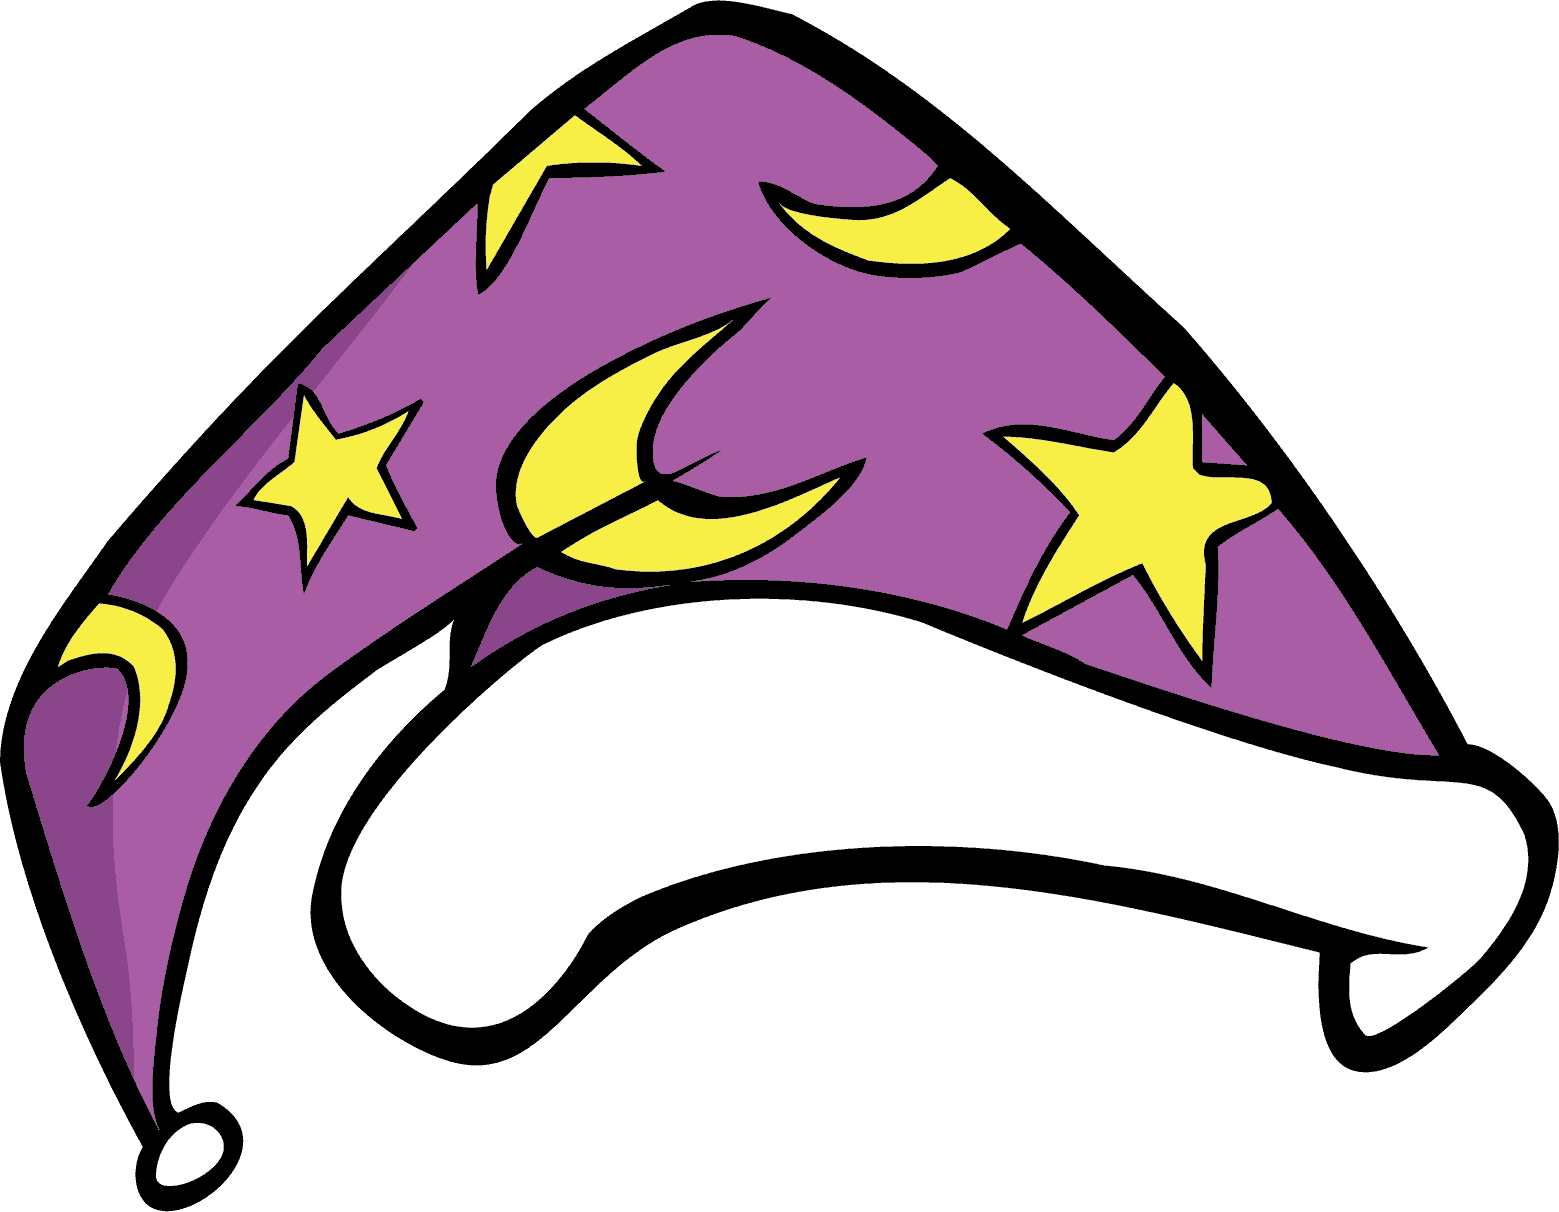 Free on dumielauxepices net. Pajama clipart hat